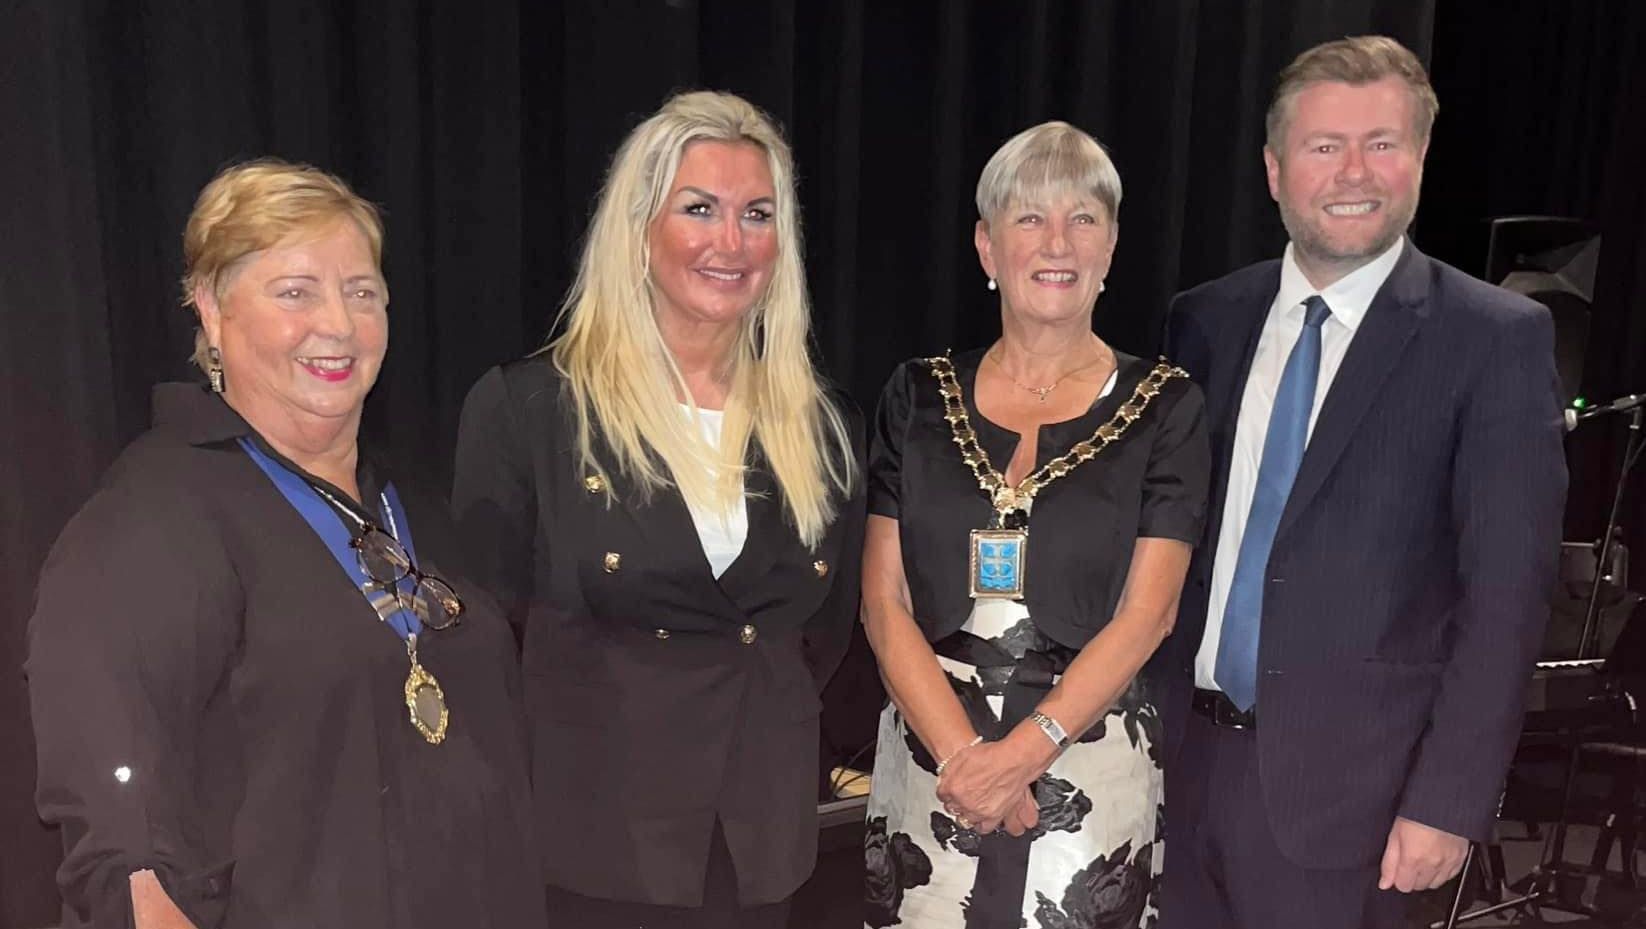 Southport Piano Academy has celebrated its 10th anniversary with a special concert. Chairman of The Southport Music Festival, Sue Dexter; Southport Piano Academy Principal Claire Kelly; Mayor of Sefton Cllr June Burns; and Southport MP Damien Moore